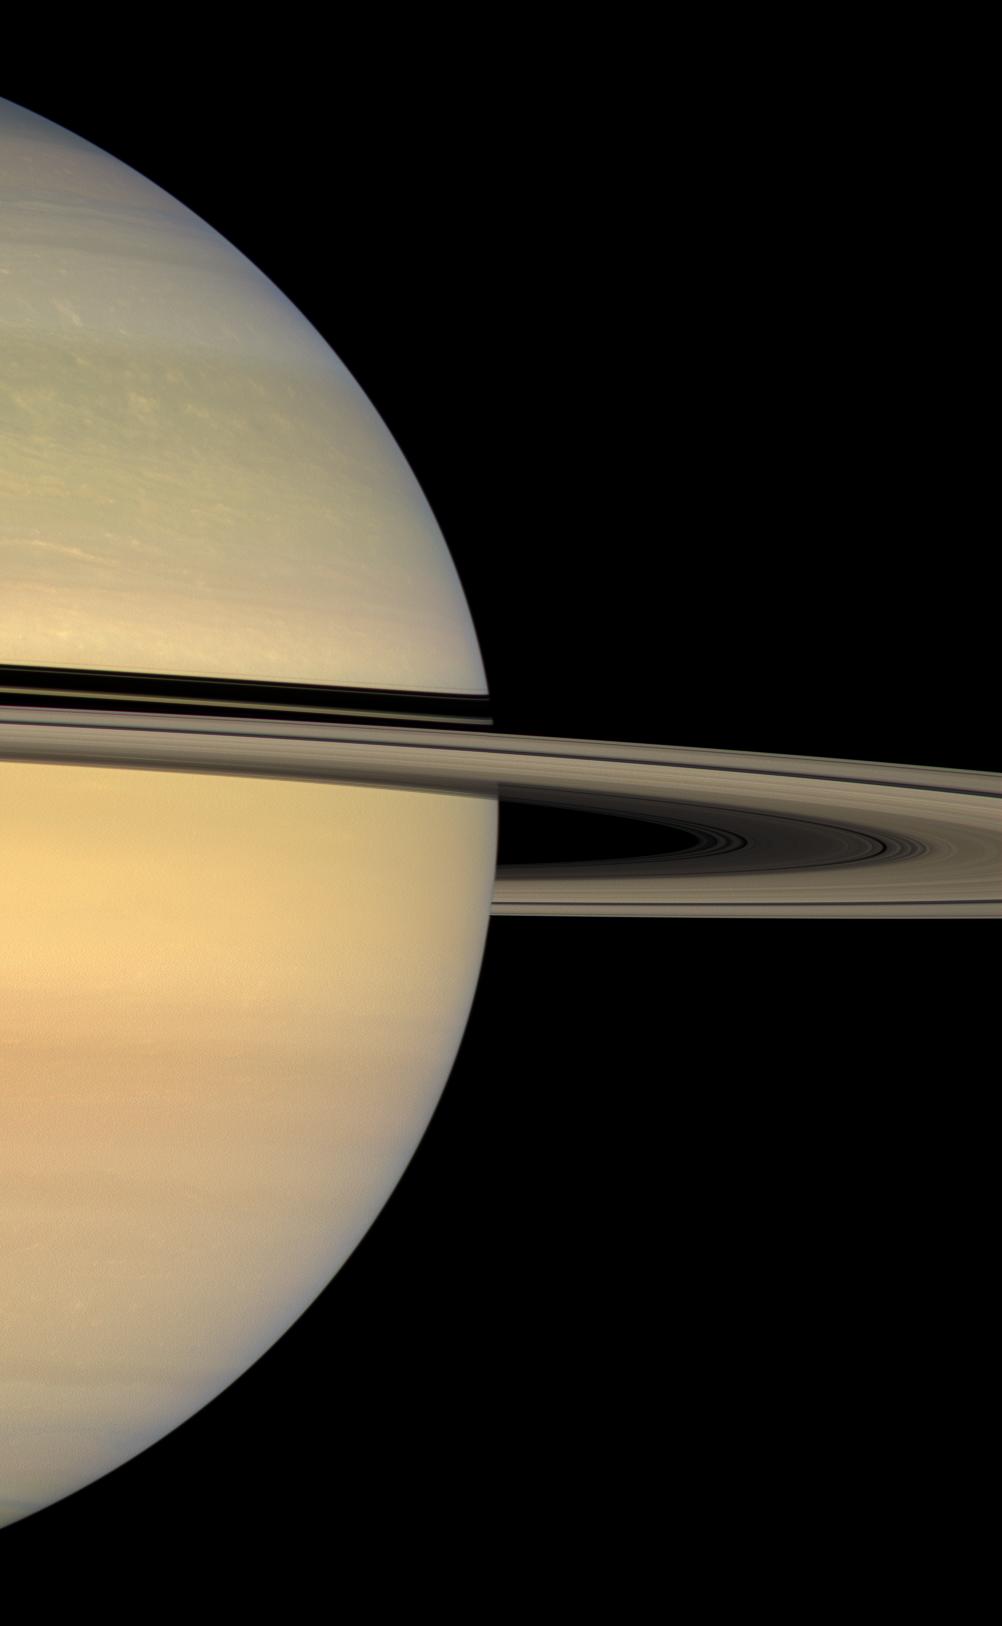 sunlit face of Saturn's rings, whose shadows continue to slide southward on the planet